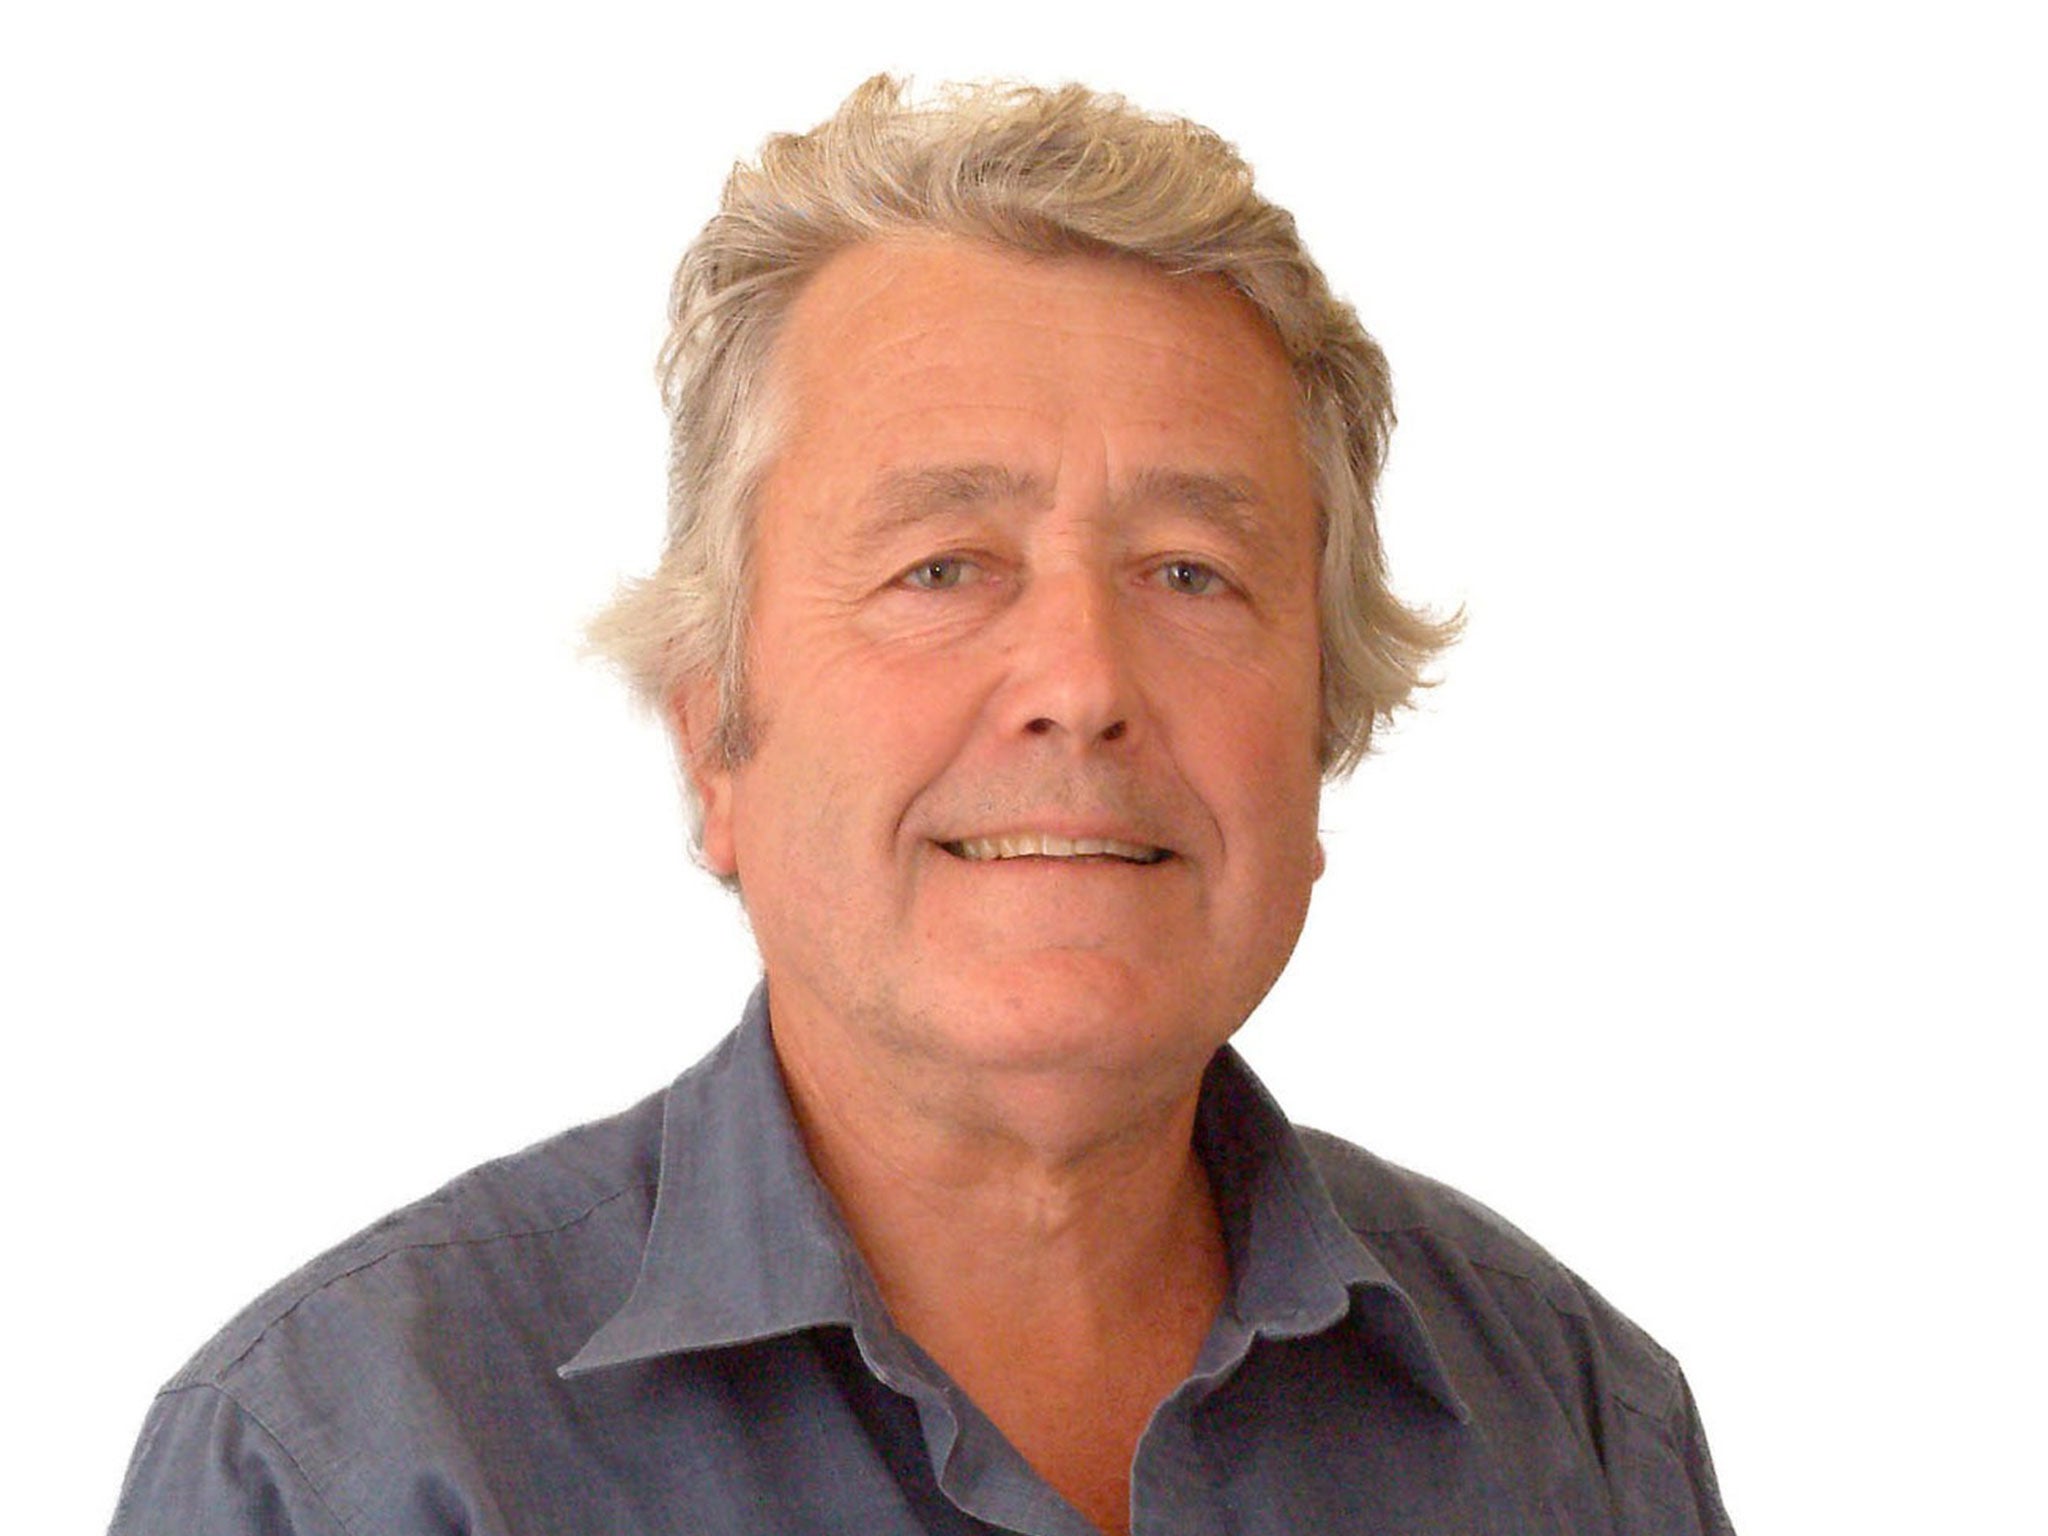 Peter Donaldson was 70-years-old